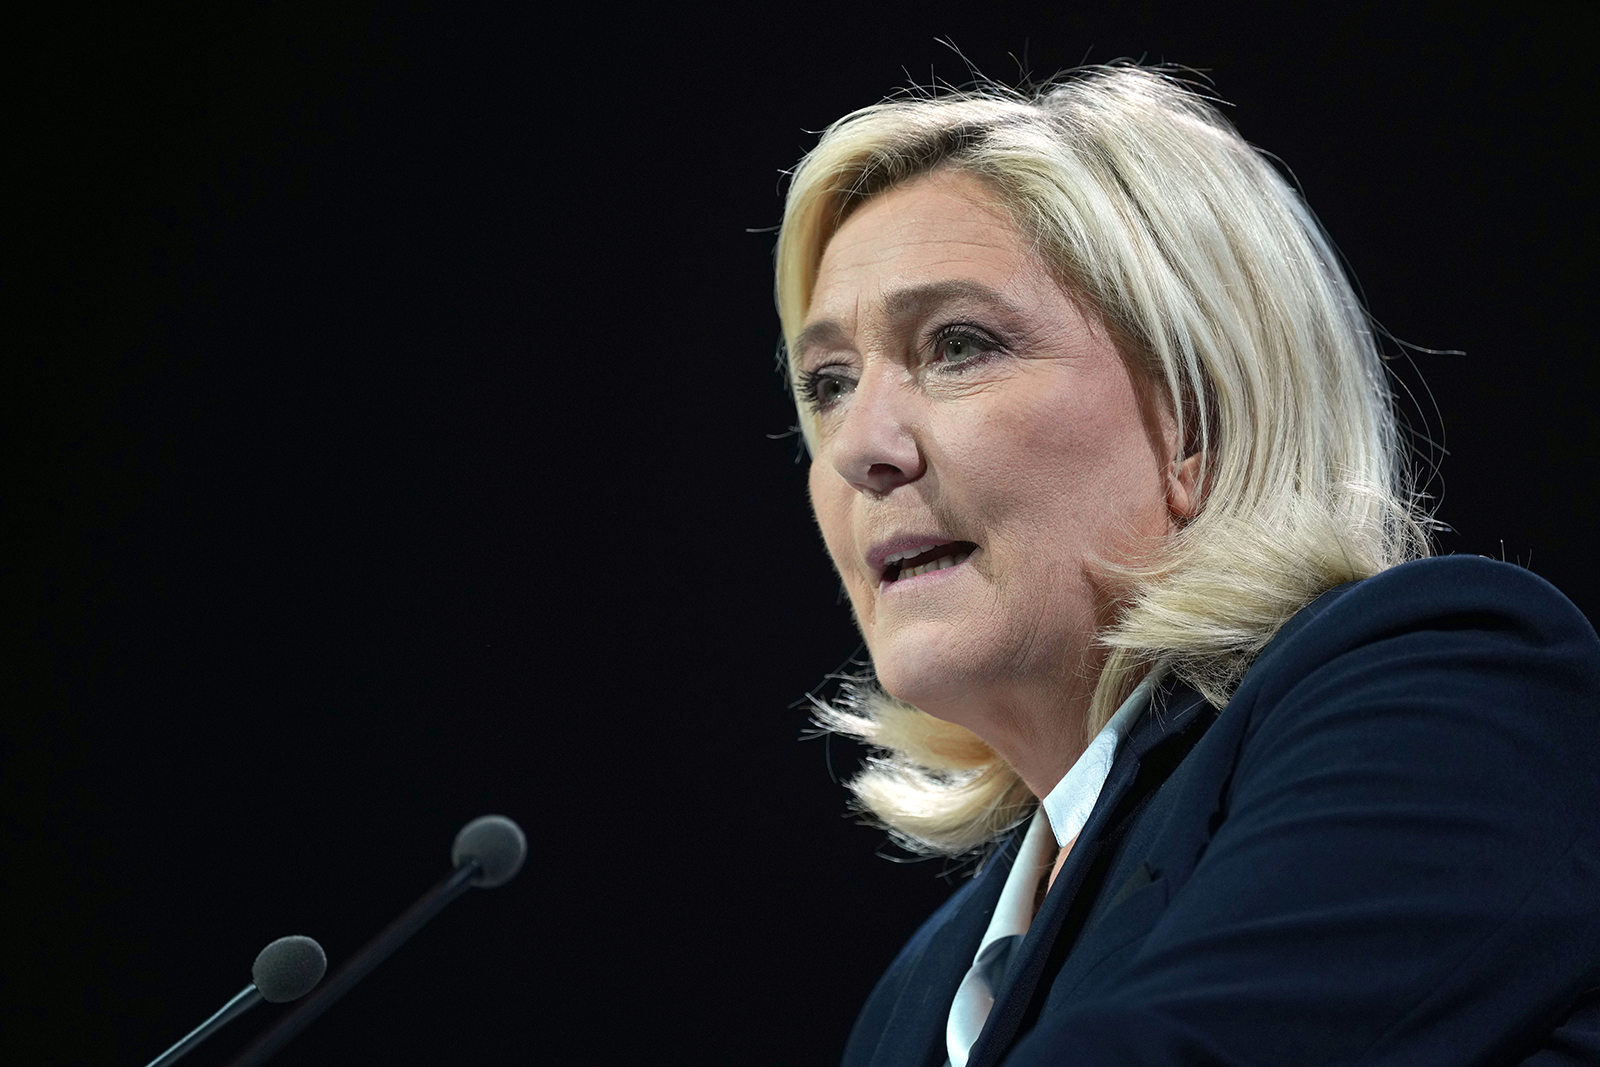 National Rally candidate for upcoming 2nd round of French presidential election, Marine Le Pen holds her last meeting for the campaign for president on April 21, in Arras, France.